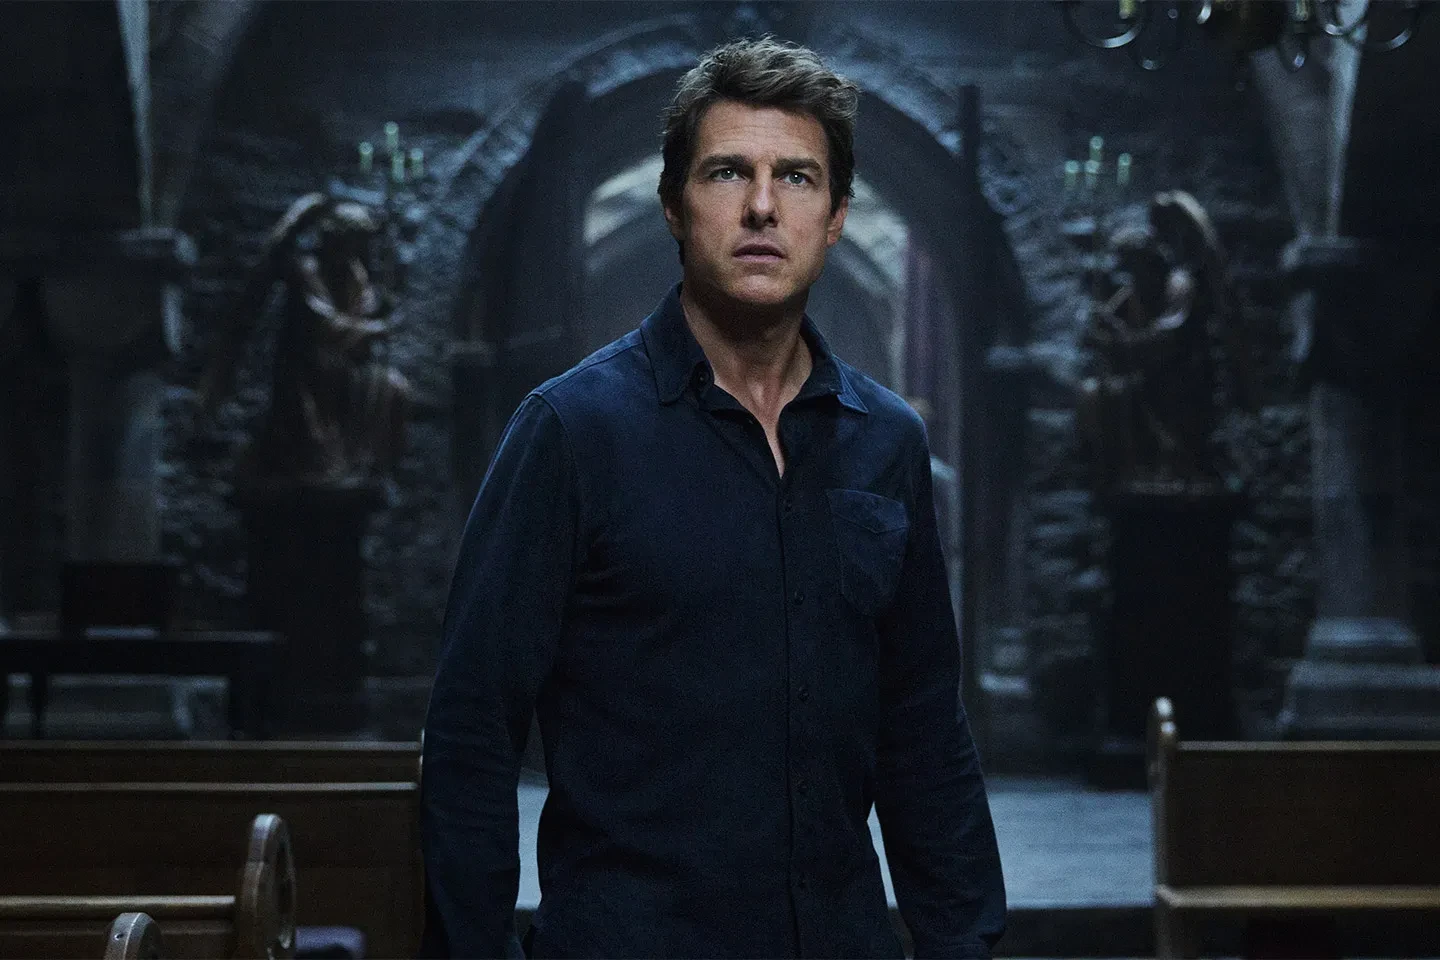 Tom Cruise in The Mummy (2017)